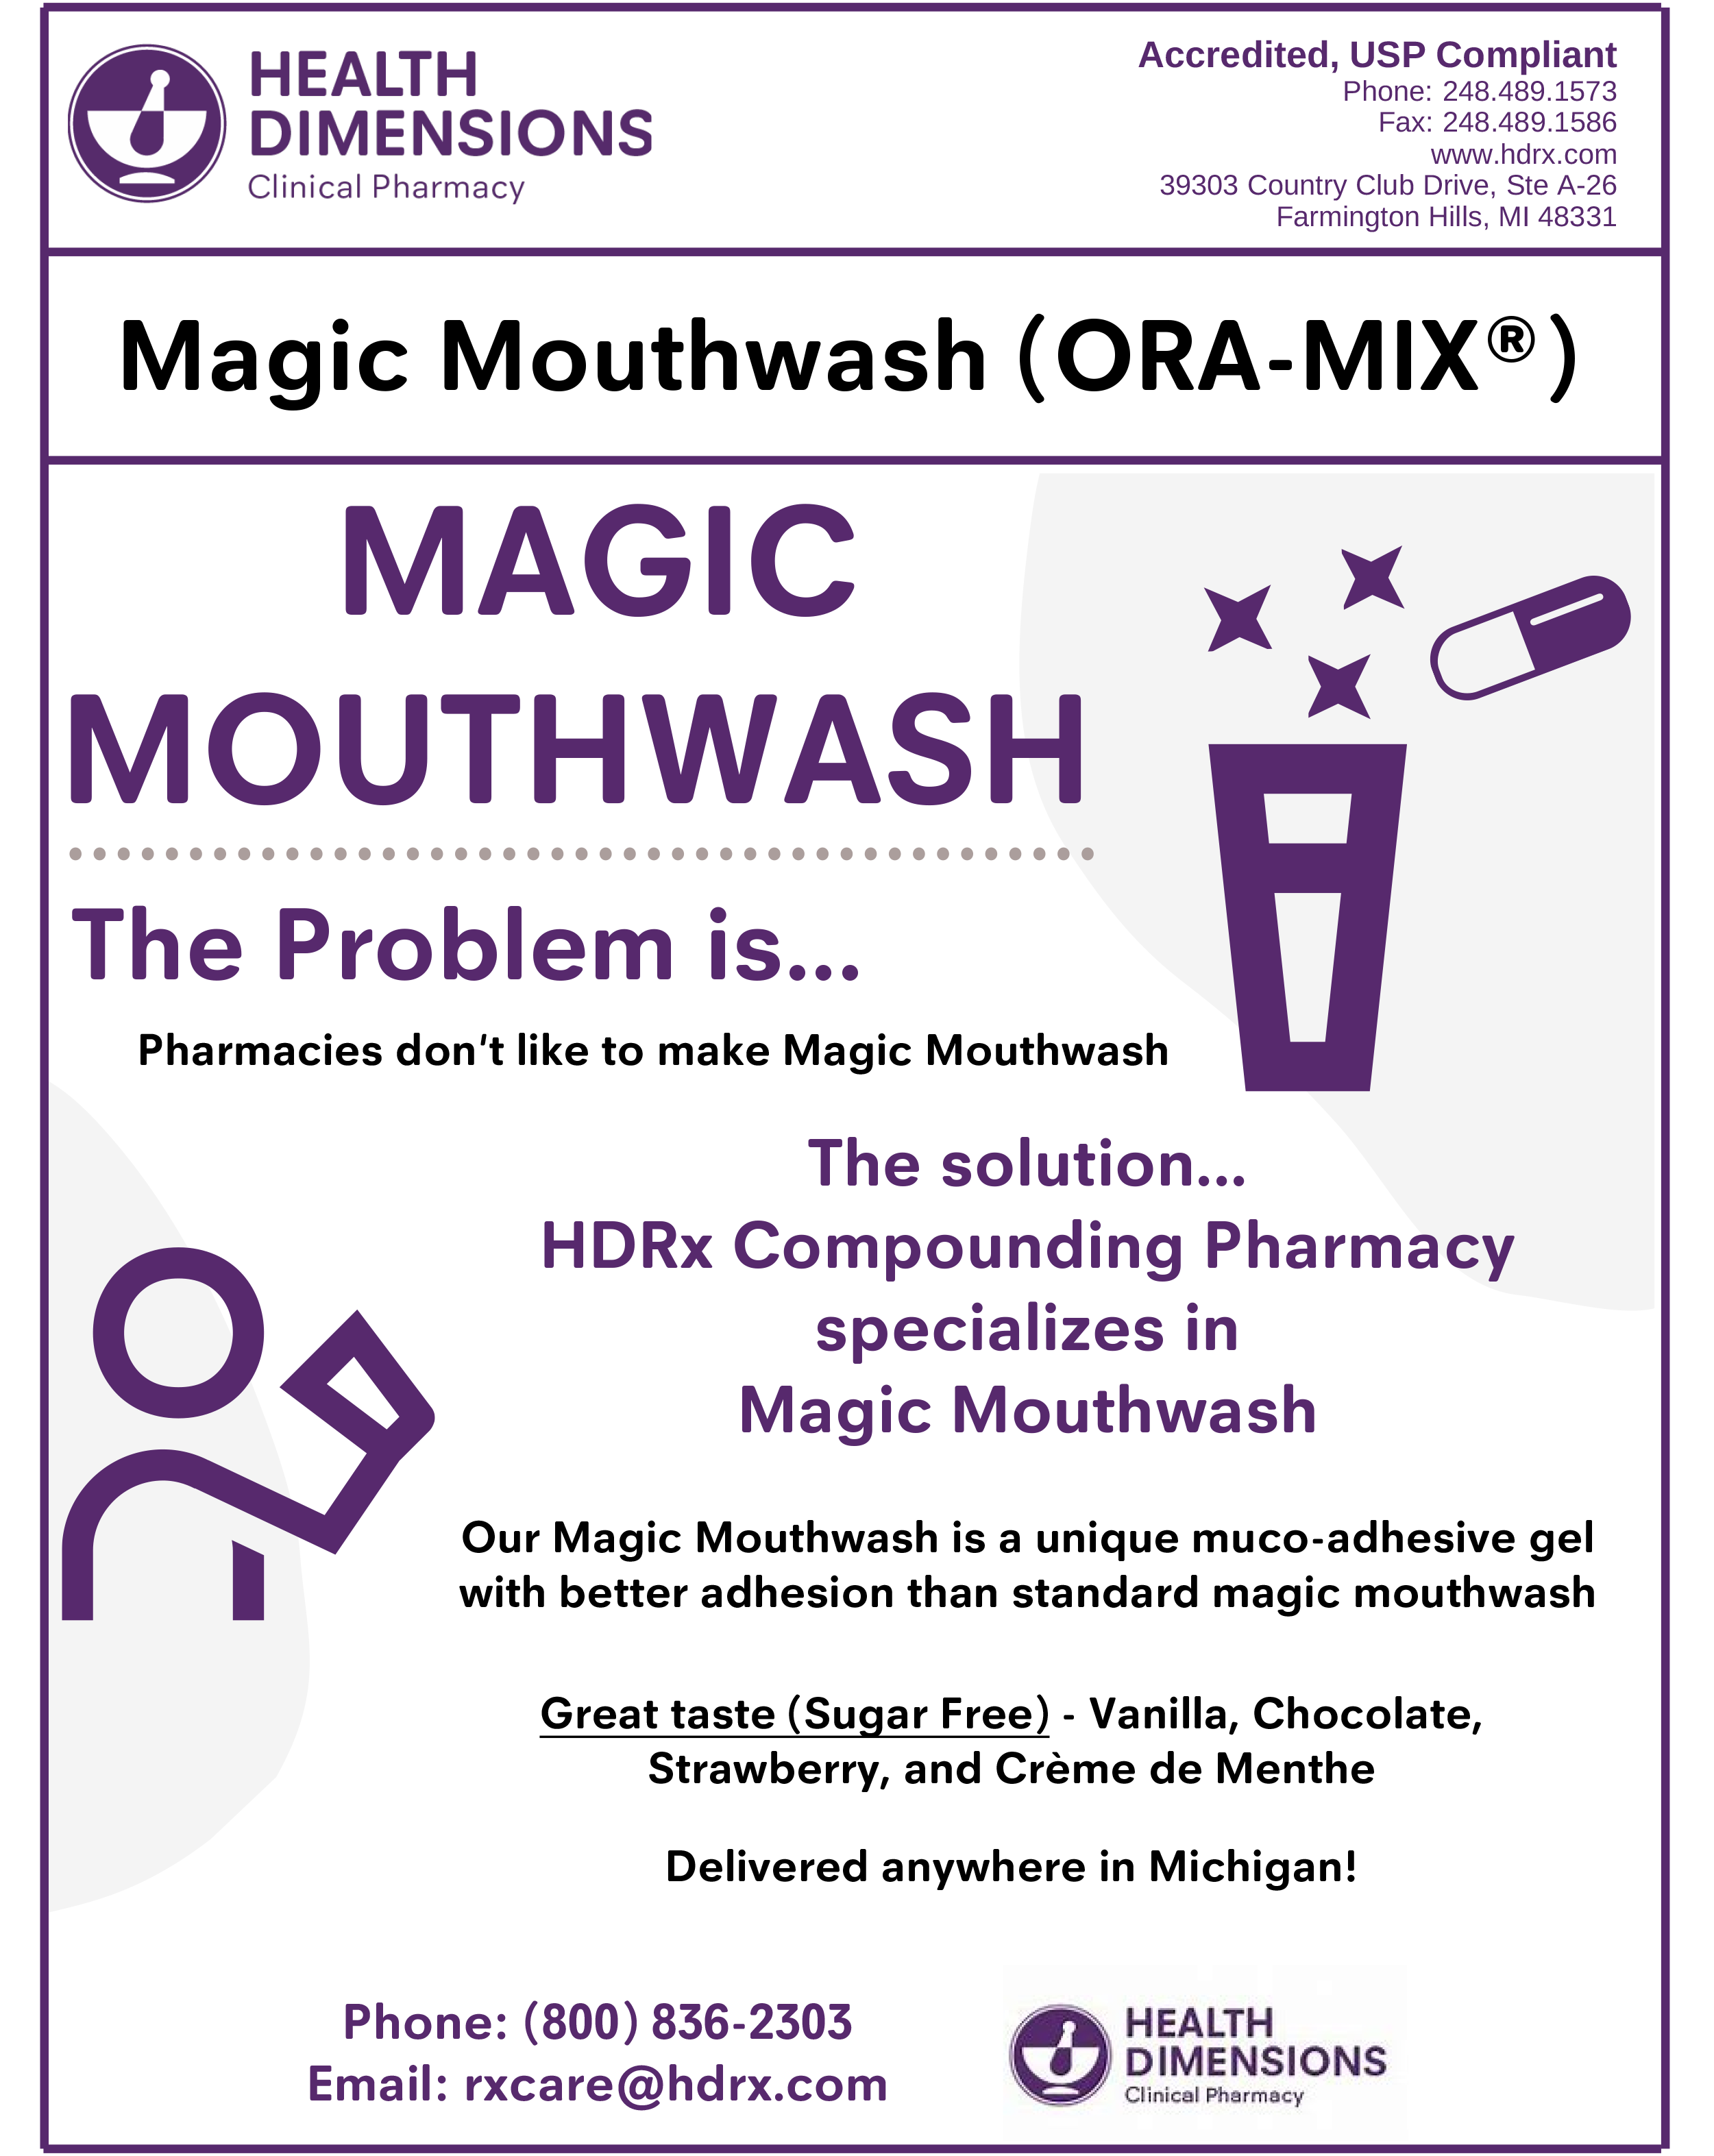 Magic Mouthwash (MMW) is an old-time, multi-purpose, compounded, liquid medication used for oral inflammation, infections, and pain. However, the traditional compounding process of MMW faces several challenges, including limited availability, time constraints for pharmacists, and short shelf-life. 